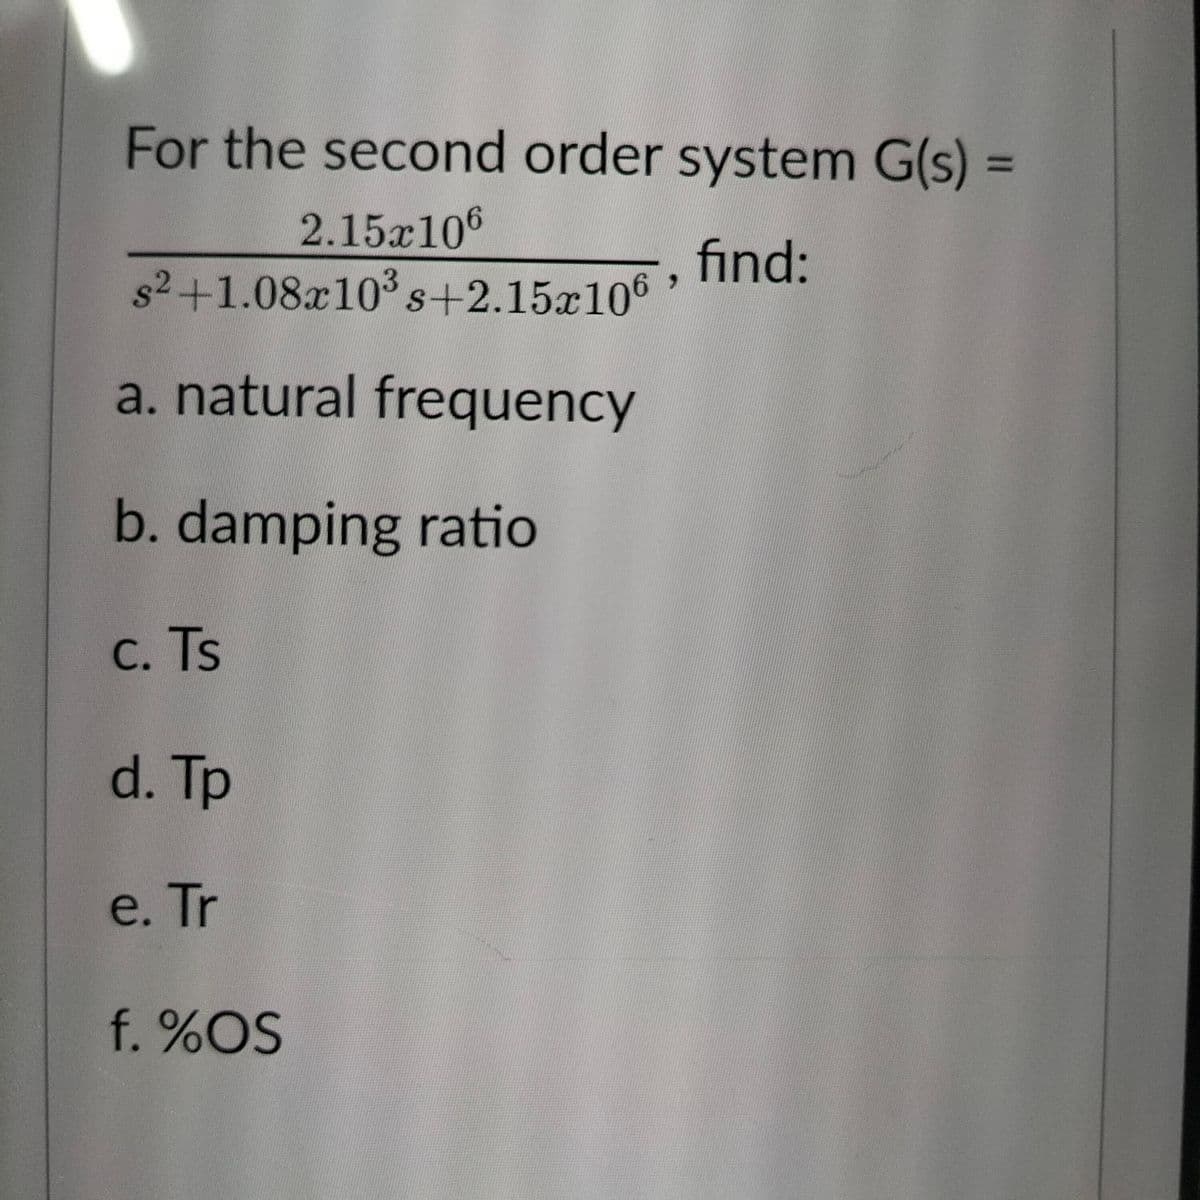 For the second order system G(s) =
2.15x106
find:
s² +1.08x10³ s+2.15x106
a. natural frequency
b. damping ratio
C. Ts
d. Tp
e. Tr
f. %OS
>